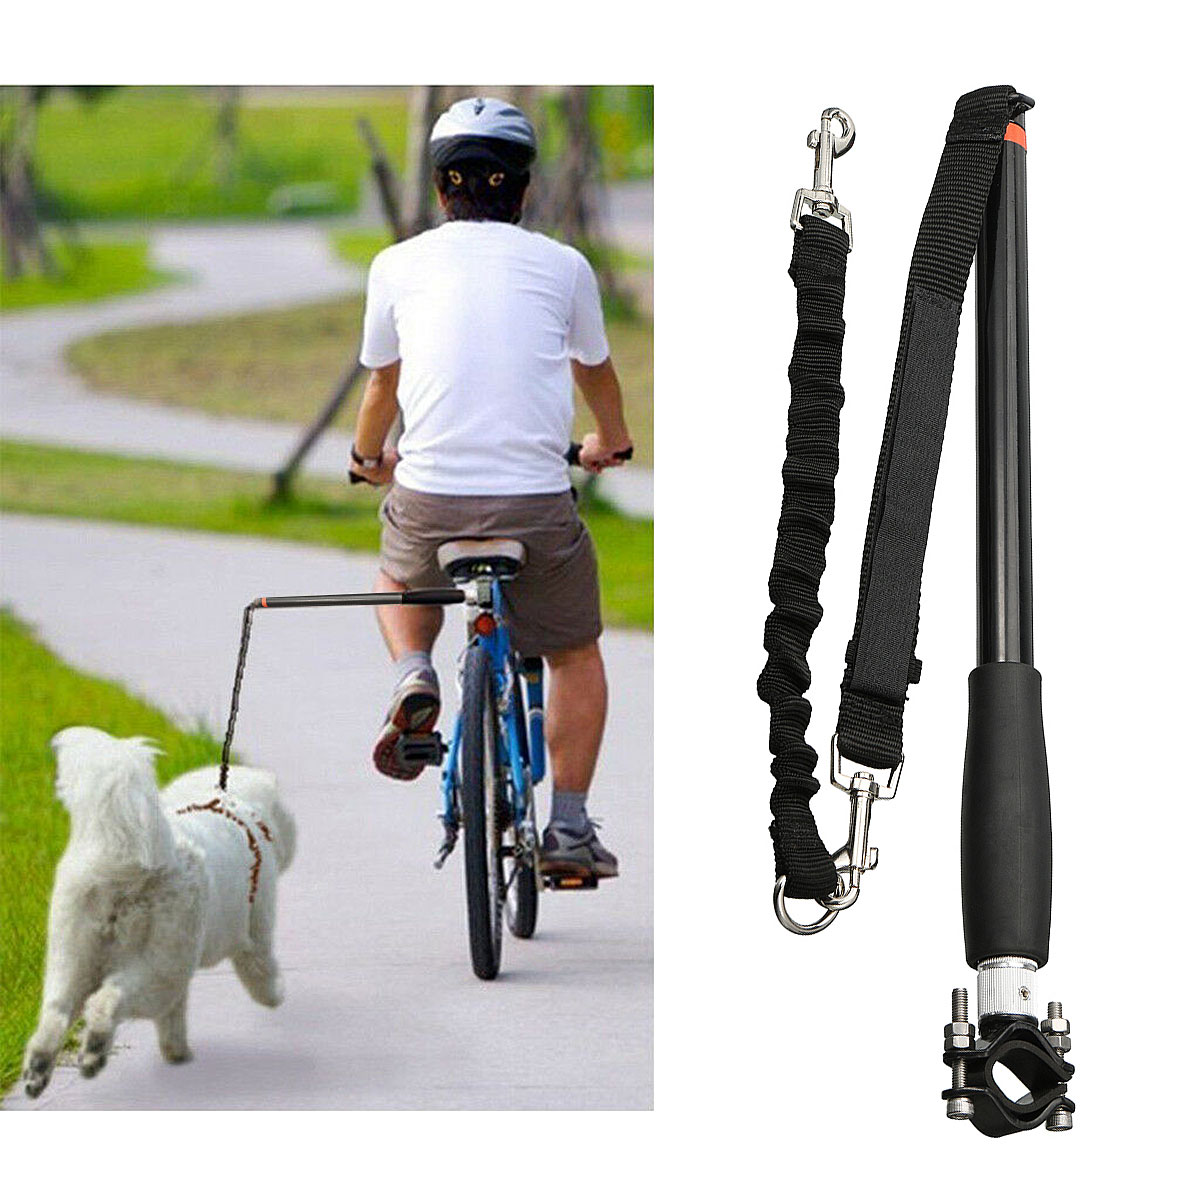 Dog-Bicycle-Leash-Hands-Free-Lead-Pet-Walker-Run-Train-Ride-Bike-Distance-Keeper-Traction-Rope-1518226